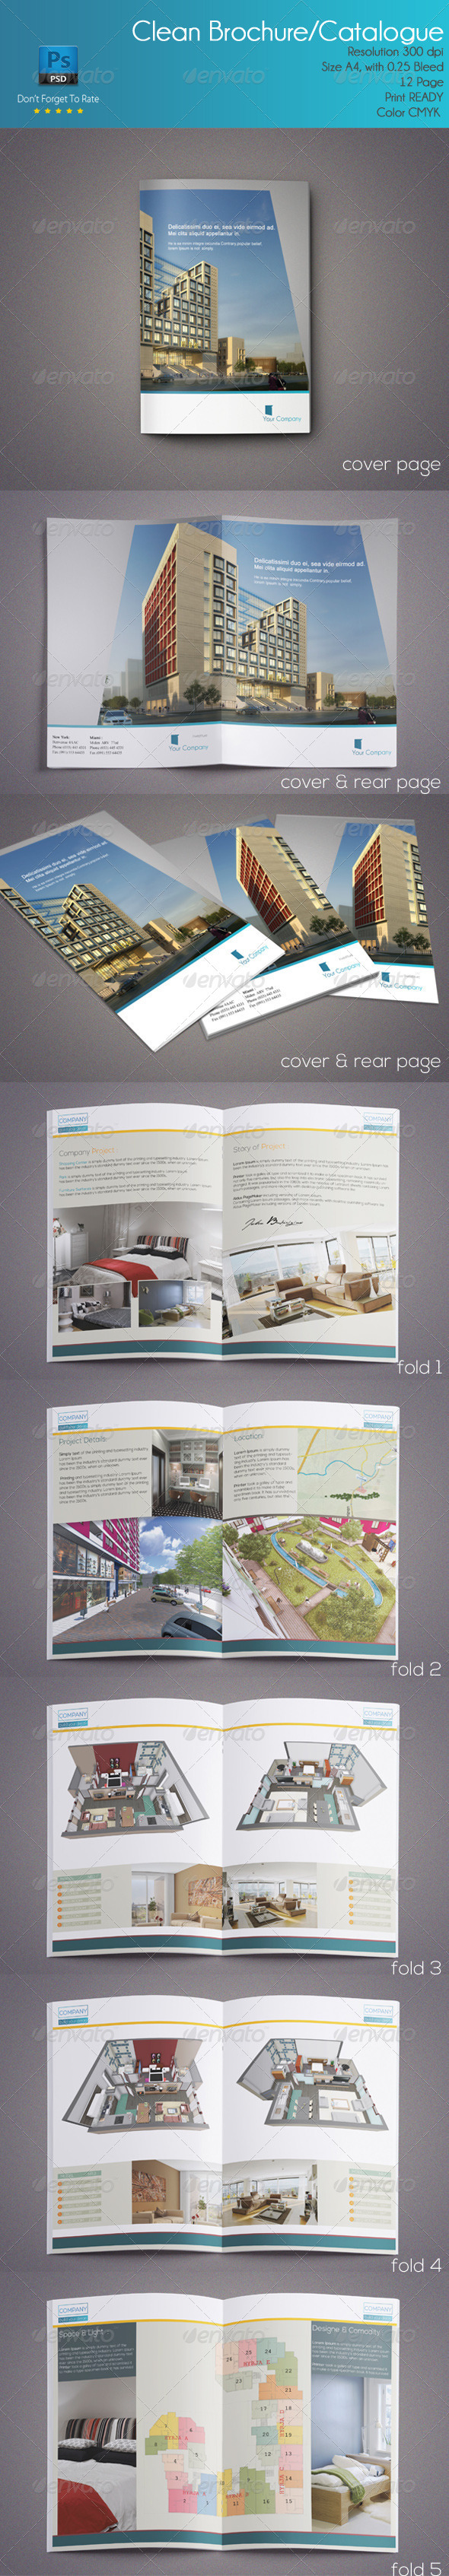 arch art best brochure Catalogue clean corporate creative designer illustrated modern personal print ready simply tri-fold